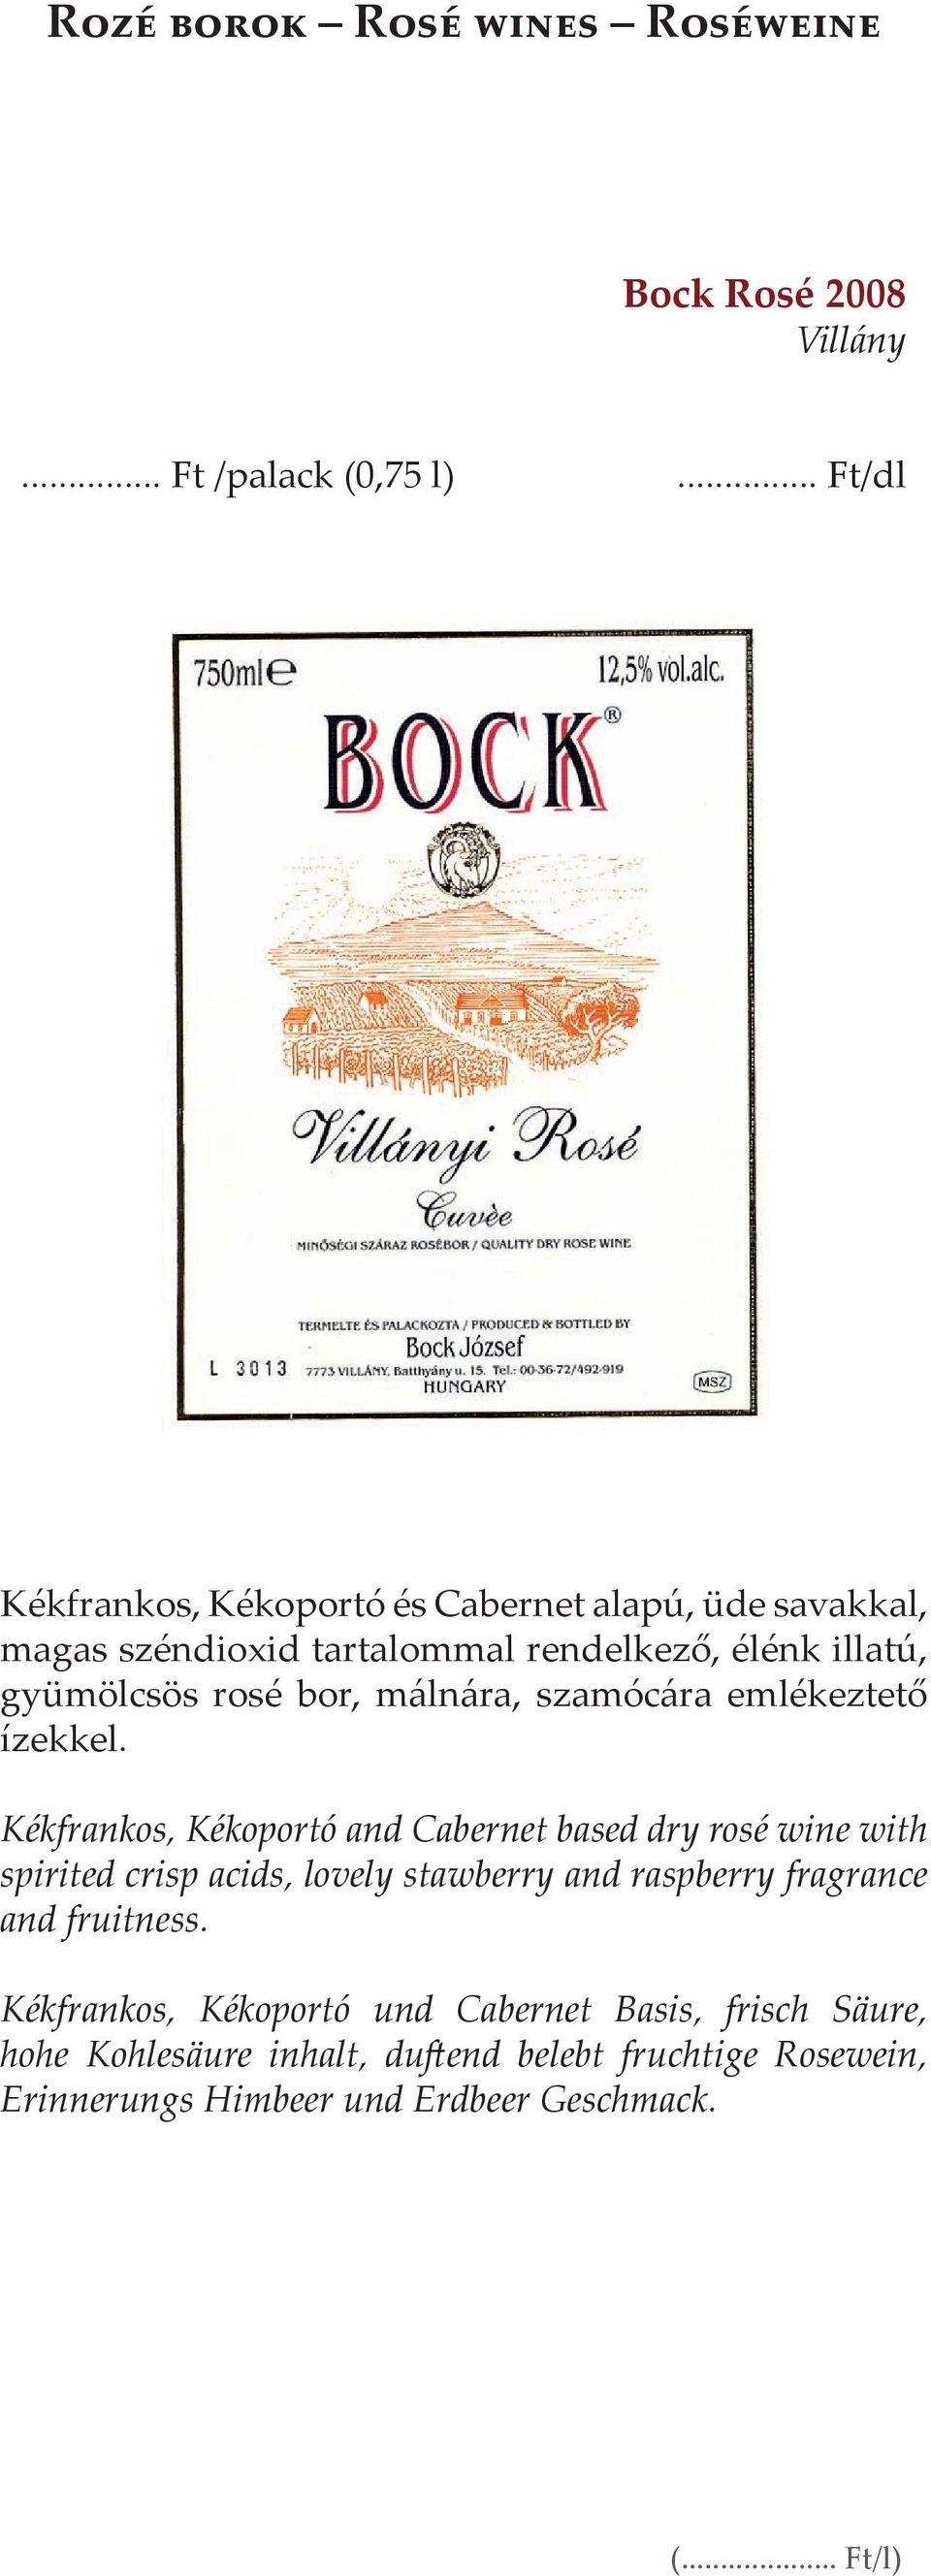 Kékfrankos, Kékoportó and Cabernet based dry rosé wine with spirited crisp acids, lovely stawberry and raspberry fragrance and